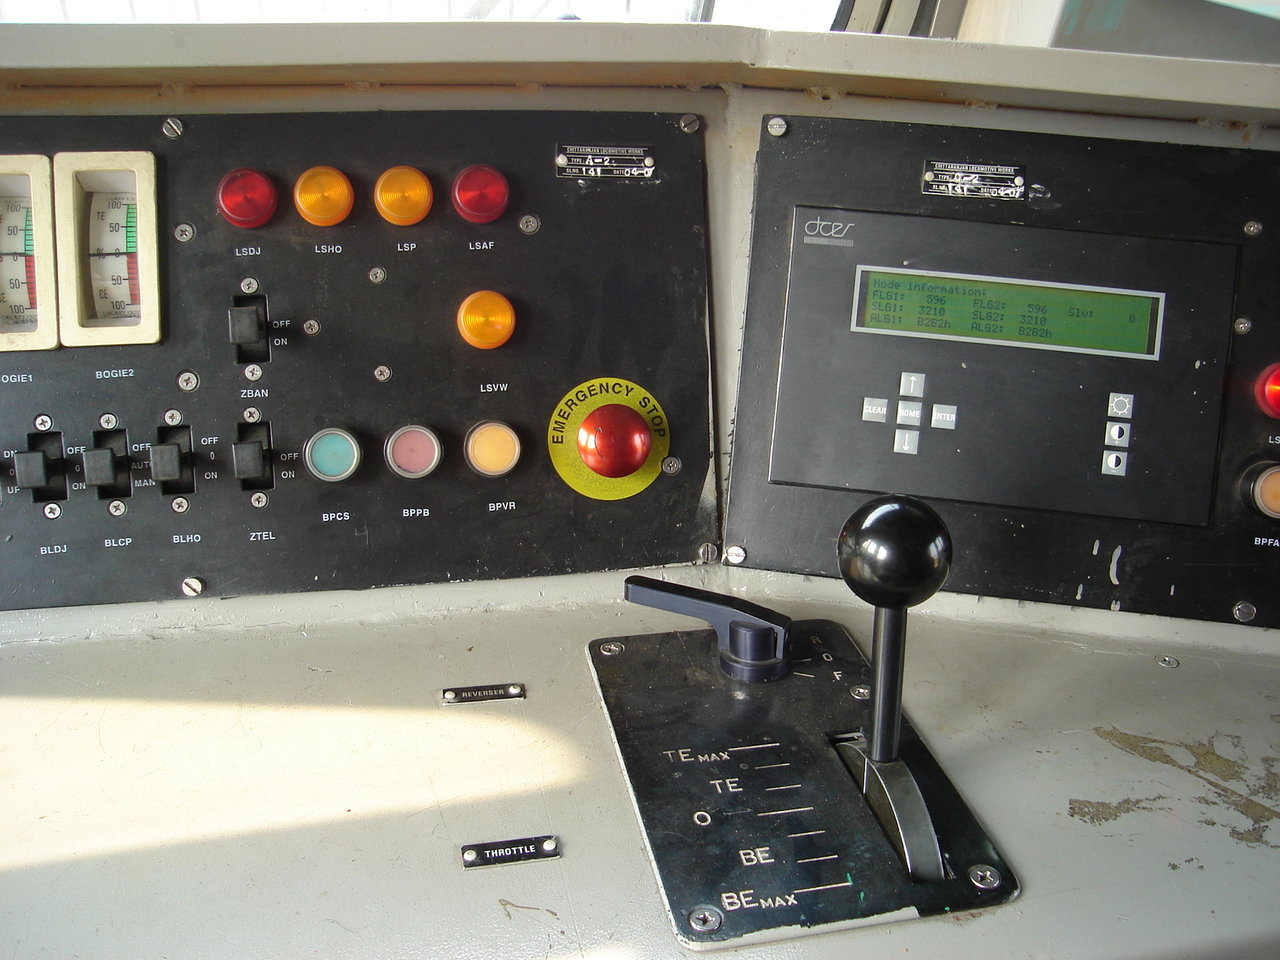 Another close look at the control panel of the LGD WAG9 31132. GZB els. Sandeep Marzara